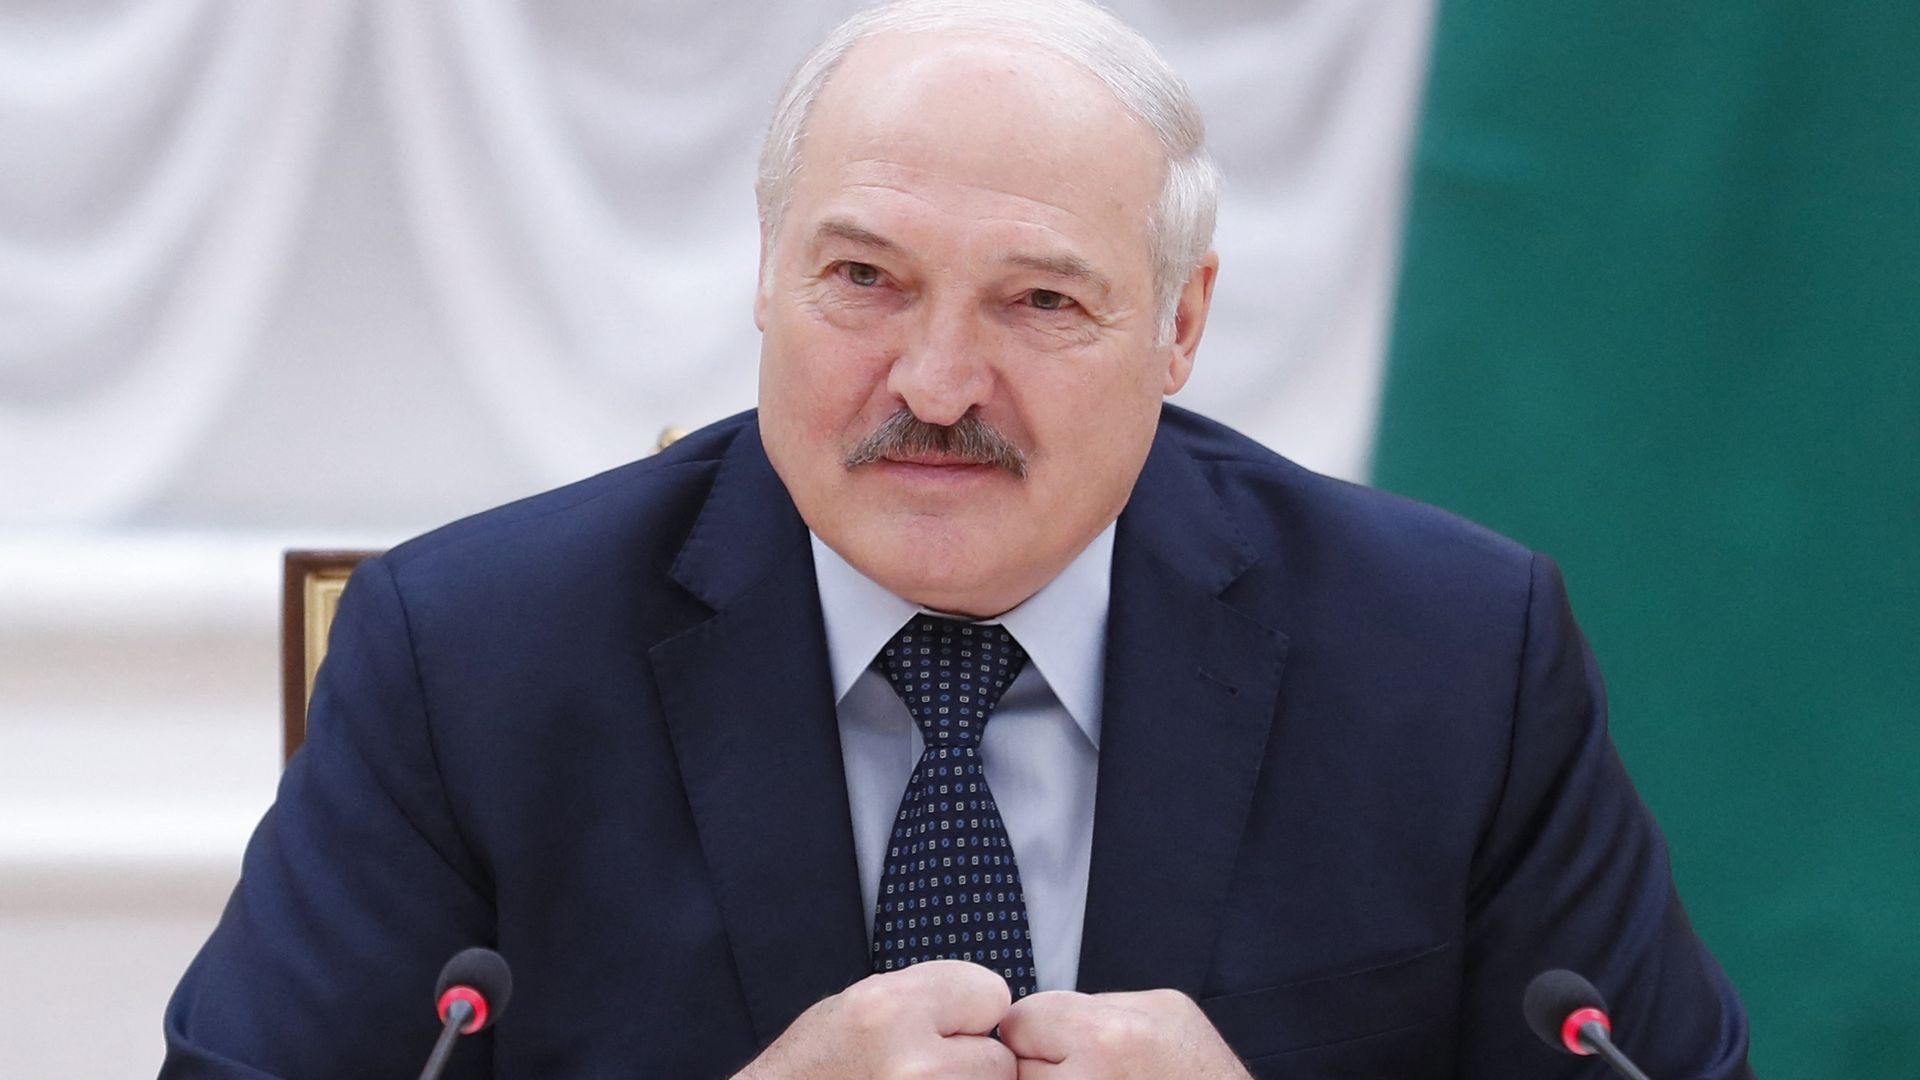 President Alexander Lukashenko said any country that joins the Union State pact between Belarus and Russia would get free nuclear weapons.